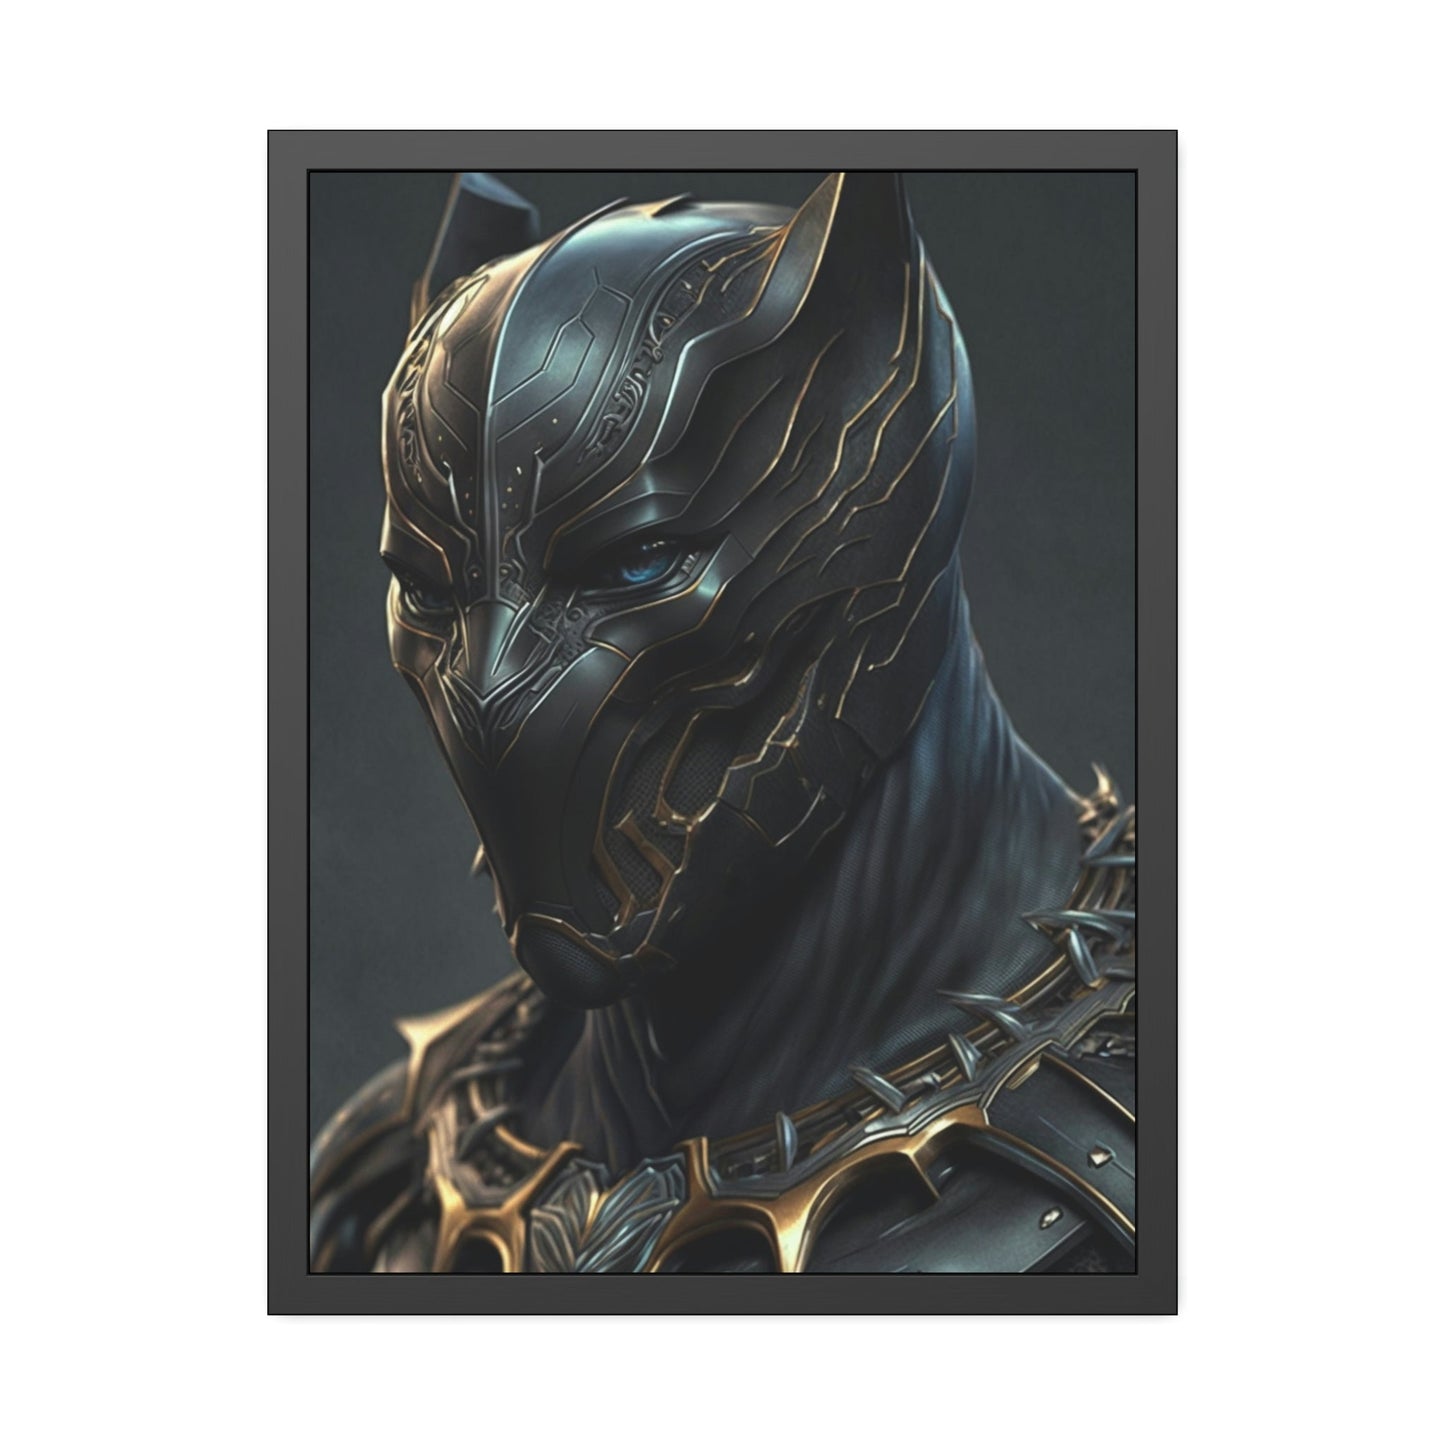 Panther Power: Poster and Print on Canvas with Dynamic Black Panther Art